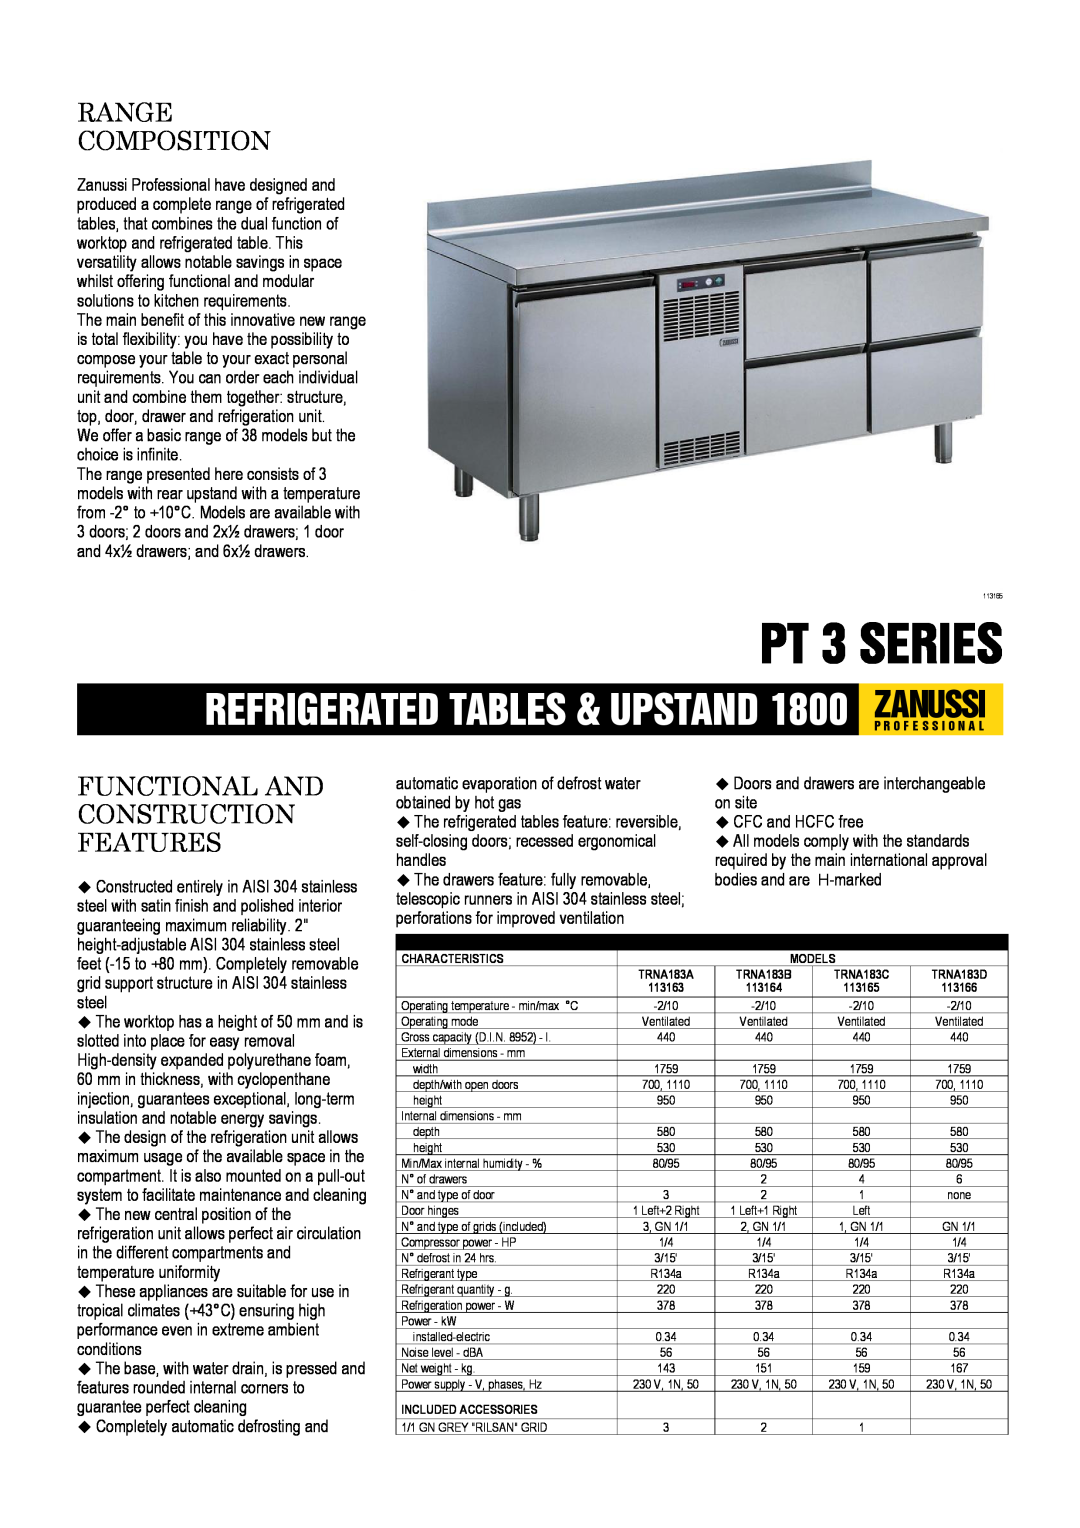 Zanussi 113164, 113165, 113163, 113166 dimensions PT 3 SERIES, Range Composition, Functional And Construction Features 